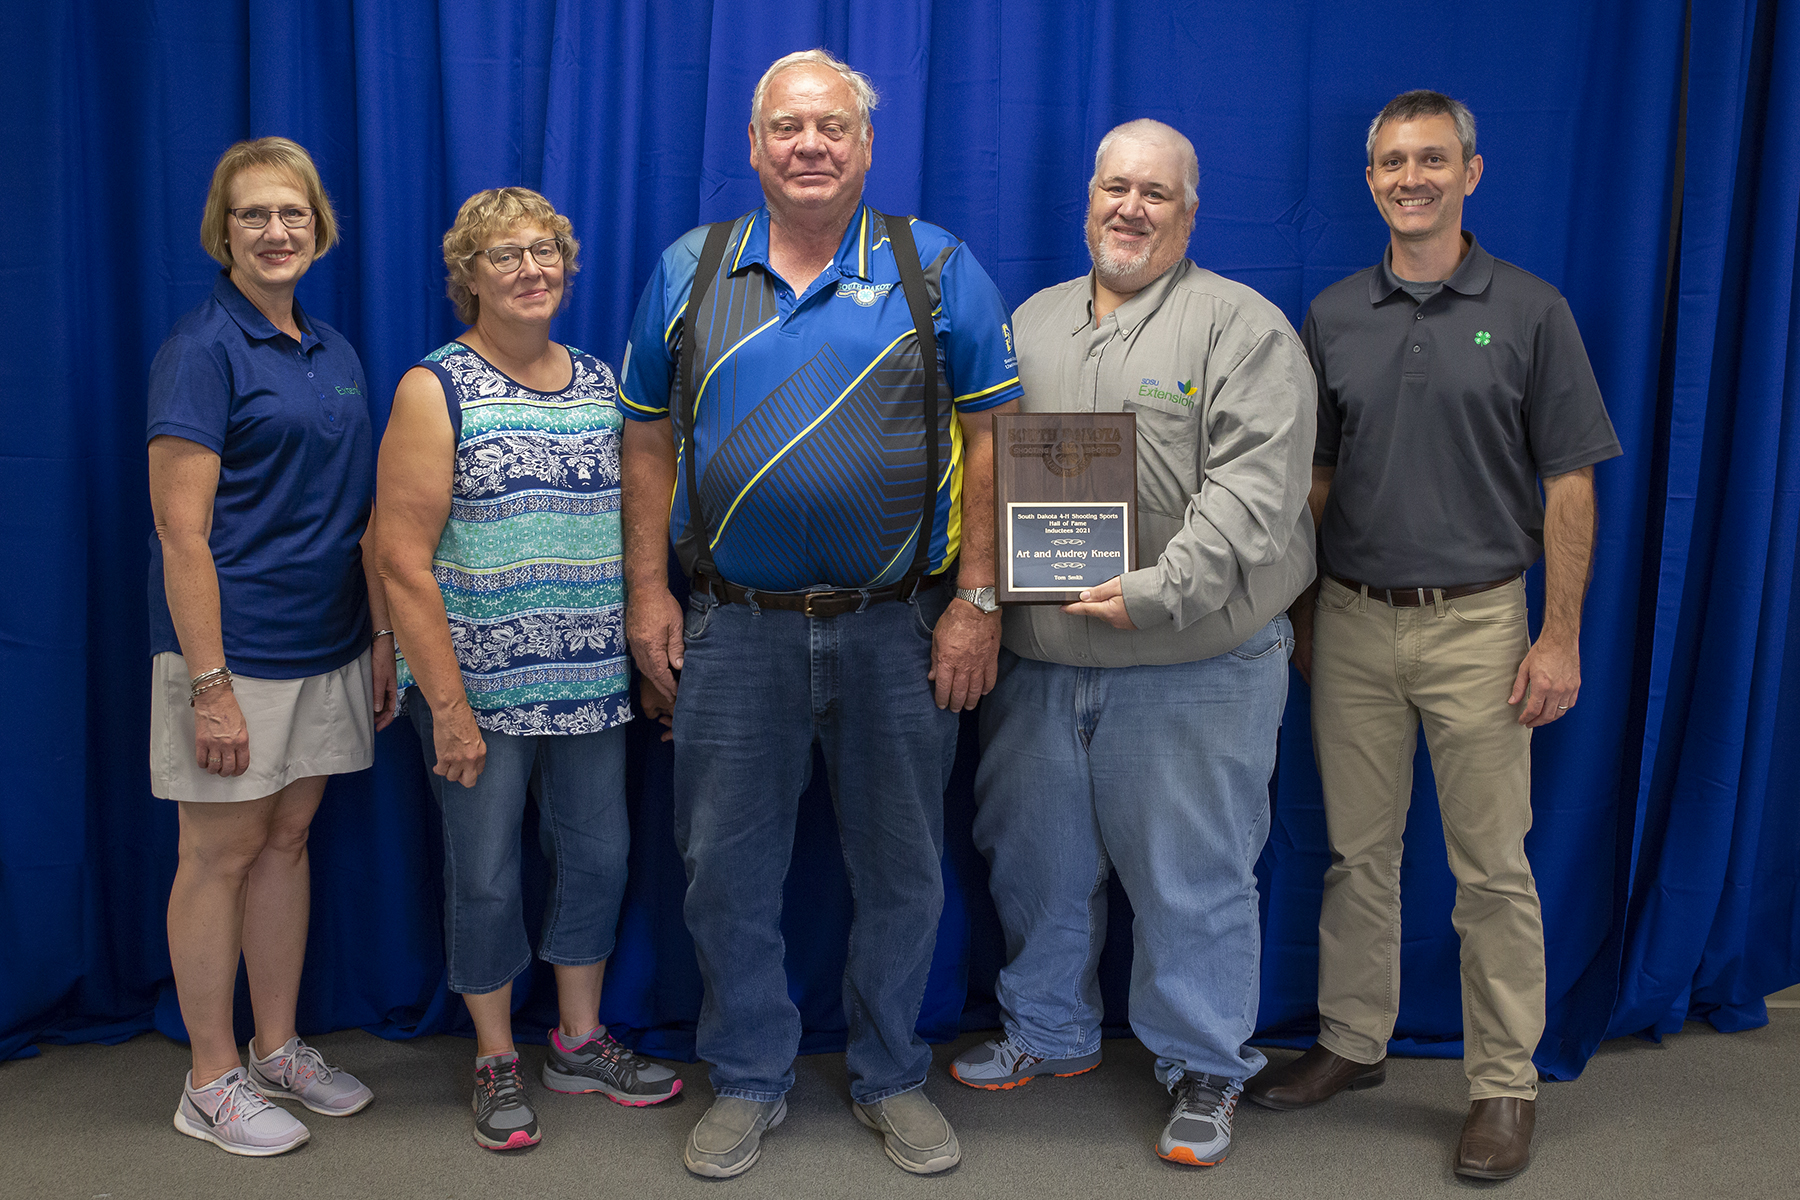 SDSU Extension Director Karla Trautman, 2021 Inductees Audrey and Art Kneen, SDSU Extension 4-H Youth Safety Field Specialist John Keimig and South Dakota 4-H Program Director Tim Tanner.